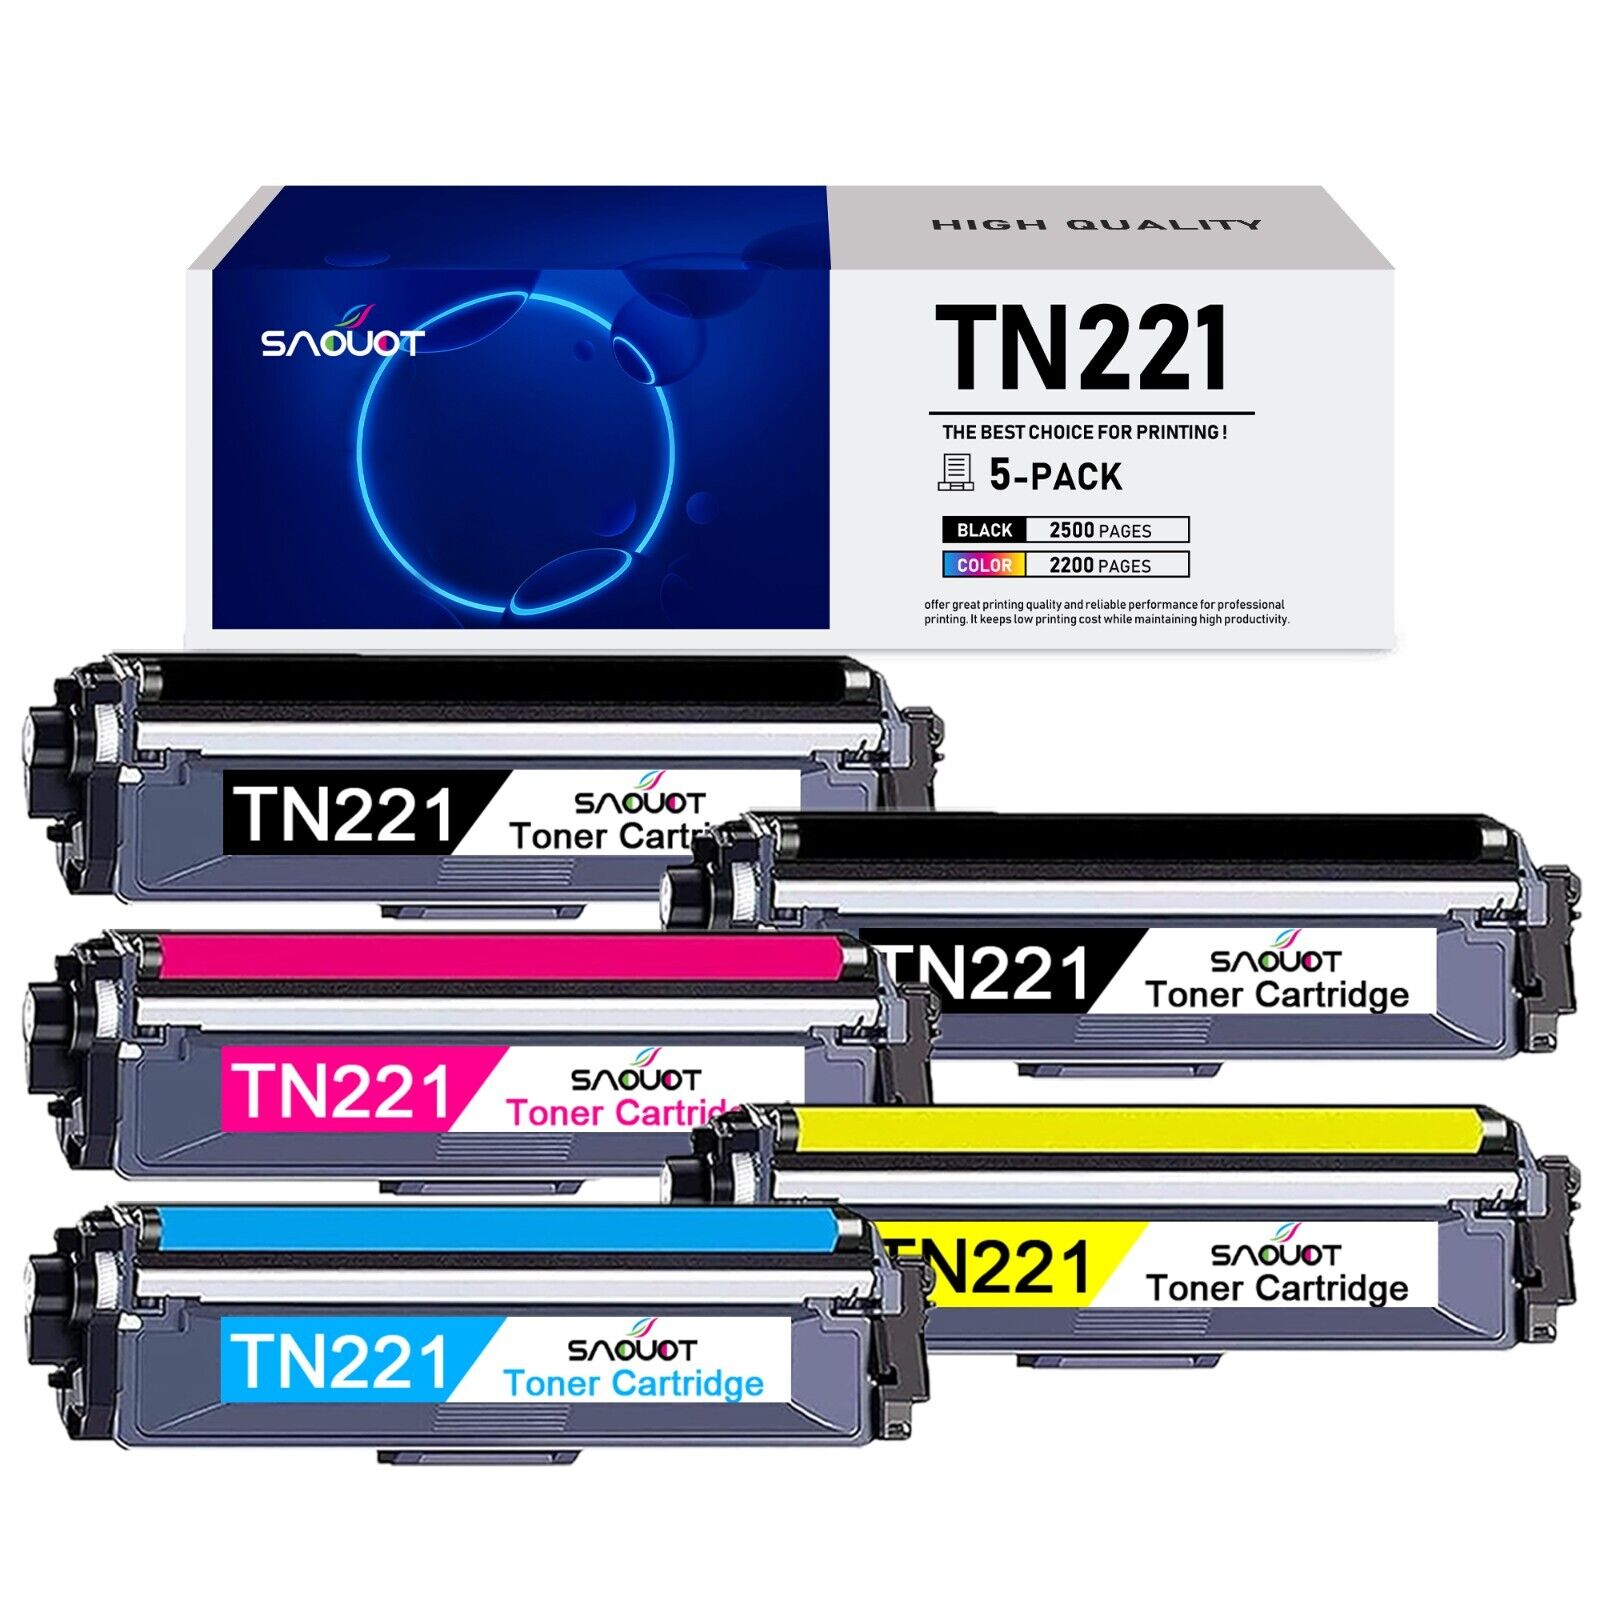 TN221 Toner Cartridges Replacement for Brother MFC-9130CW HL-3180CDW HL-3170CDW